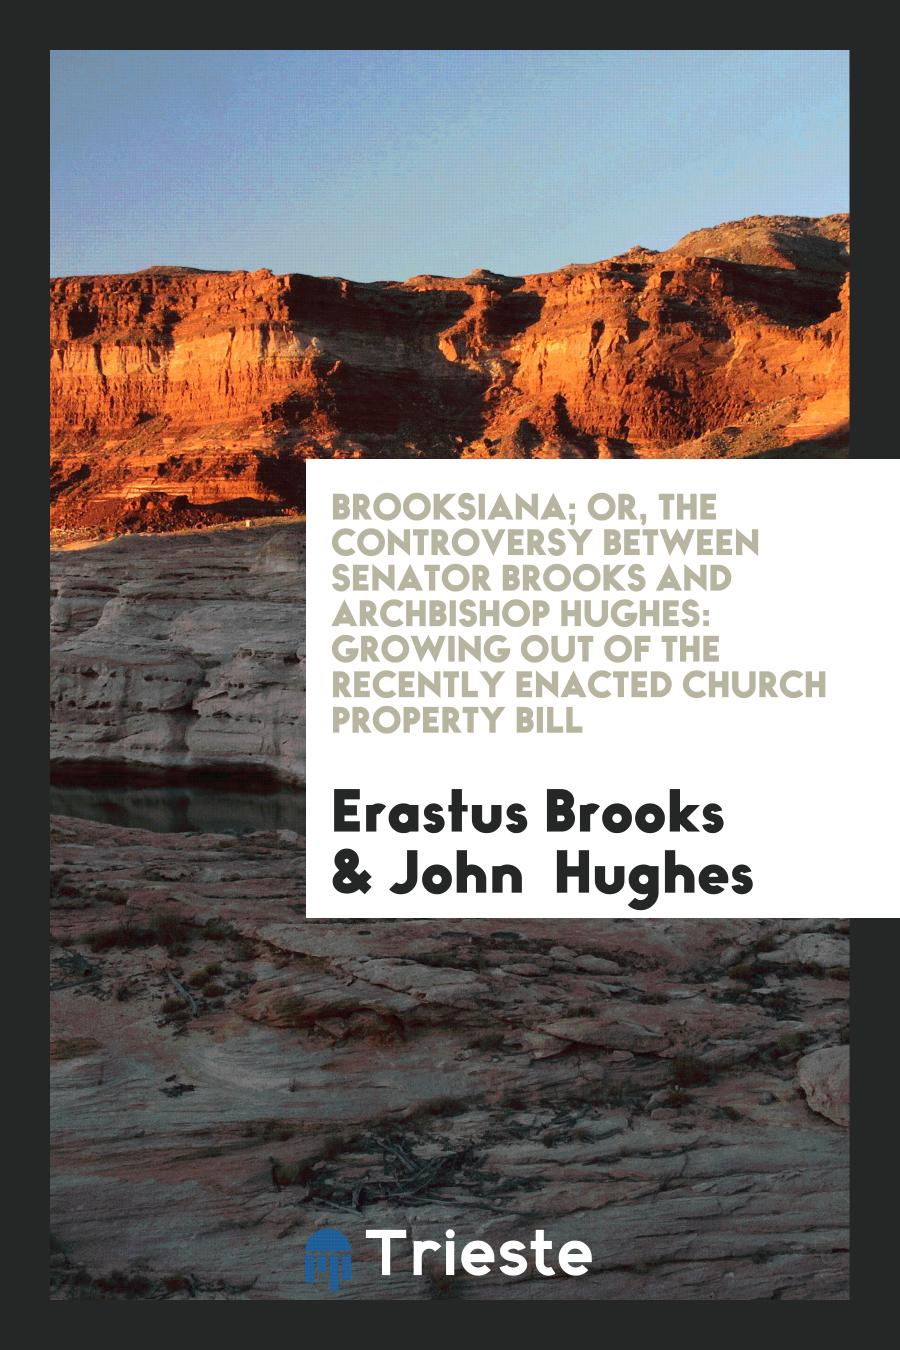 Brooksiana; Or, The Controversy Between Senator Brooks and Archbishop Hughes: Growing out of the Recently Enacted Church Property Bill